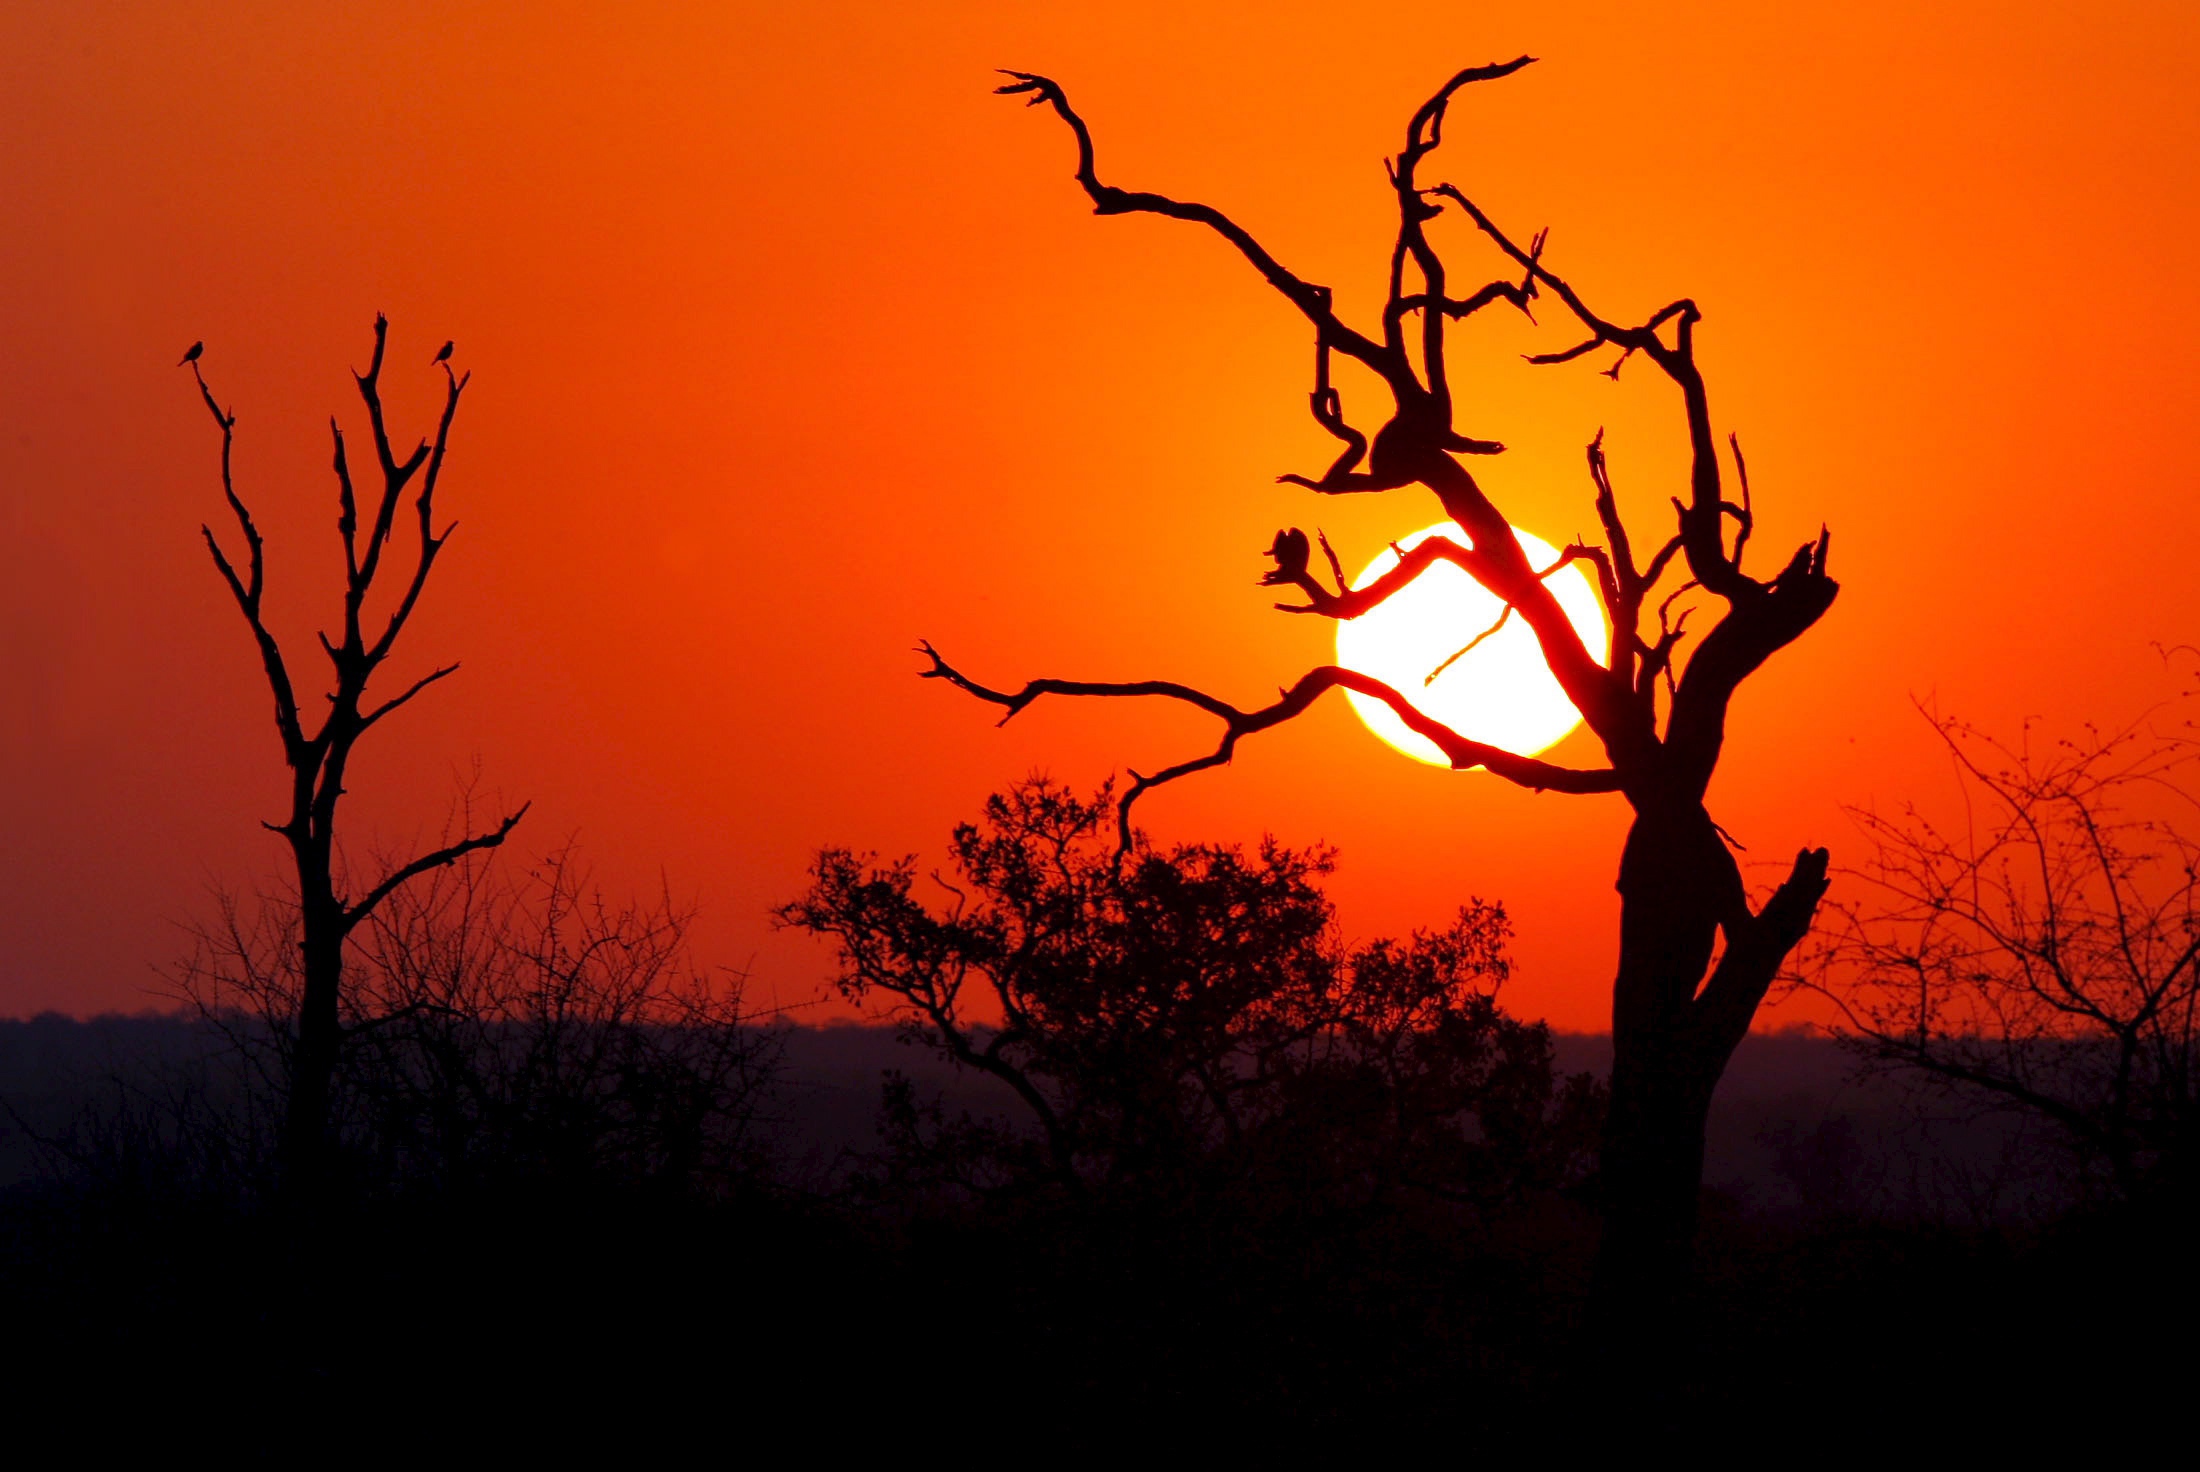 epa00542641 The sun sets behind a dead leadwood tree in the northern Kruger National Park, South Africa, Saturday 01 October 2005. With lower rainfall and a warmer winter than normal, weather conditions coded 'red' under the National Fire Danger Rating System have seen devastating fires in many provinces of the country over the last week, with drought conditions persisting in many areas including the world-famous reserve. EPA/JON HRUSA